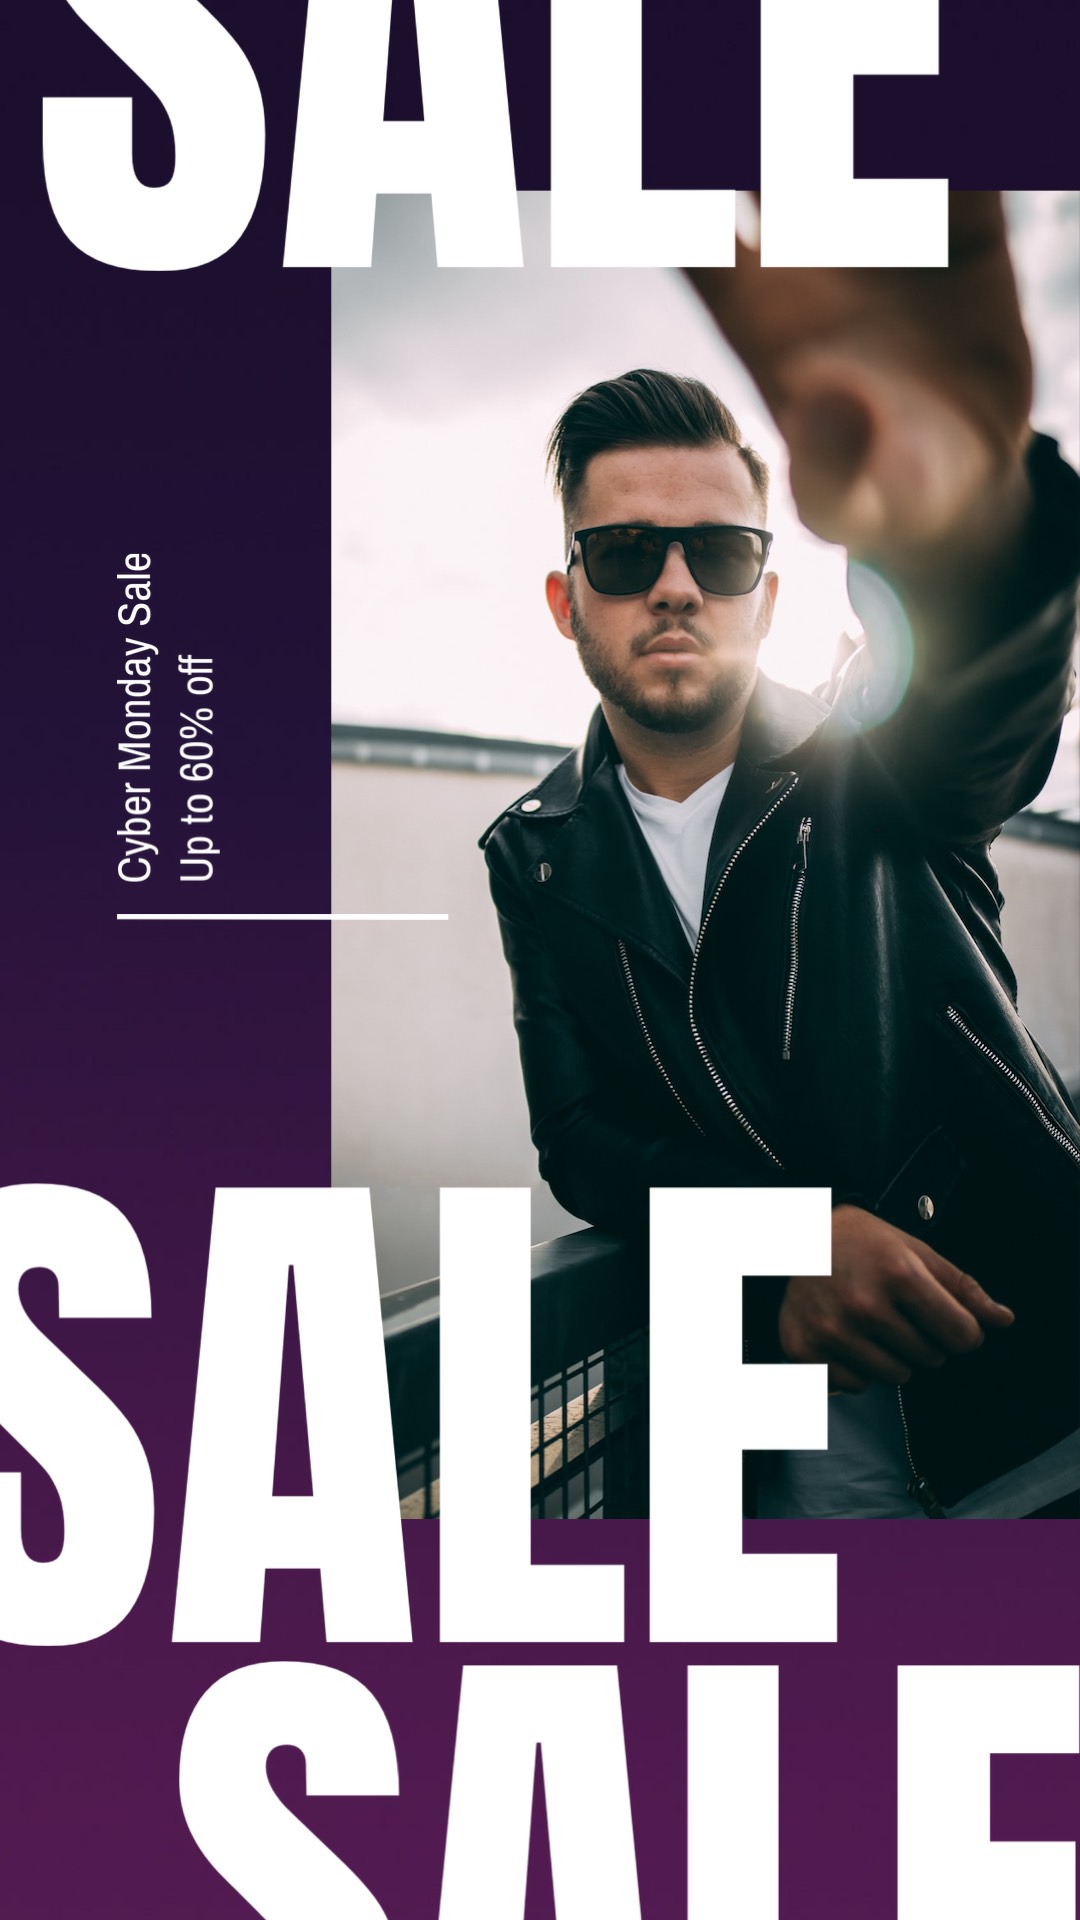 Man with suglasses cyber monday sale flyer template